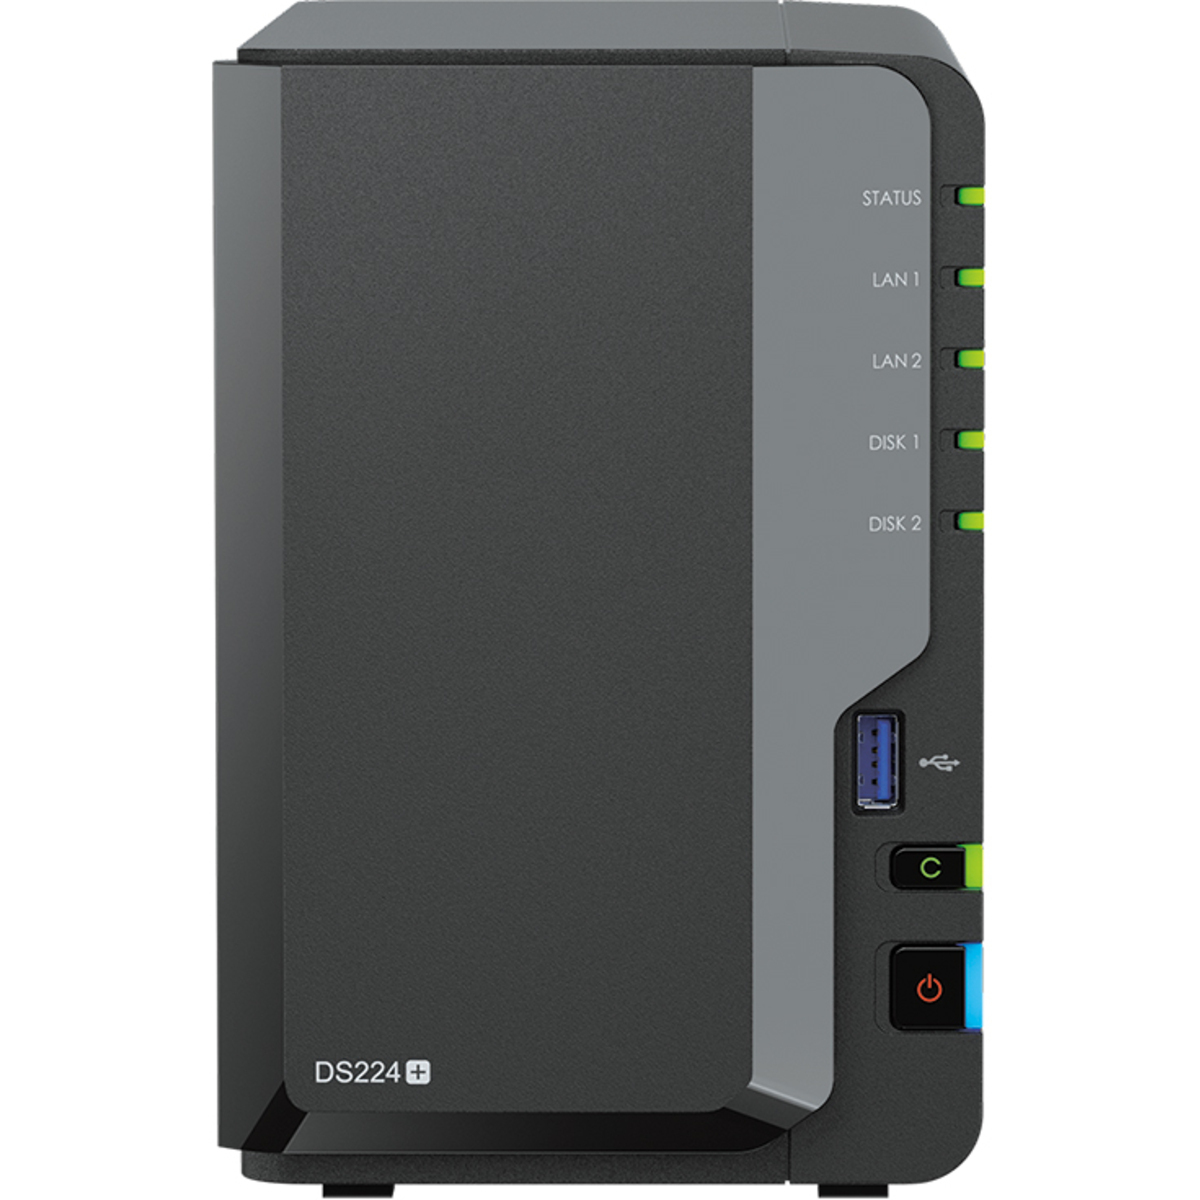 Synology DiskStation DS224+ 8tb 2-Bay Desktop Personal / Basic Home / Small Office NAS - Network Attached Storage Device 2x4tb Western Digital Red Plus WD40EFPX 3.5 5400rpm SATA 6Gb/s HDD NAS Class Drives Installed - Burn-In Tested - ON SALE - FREE RAM UPGRADE DiskStation DS224+